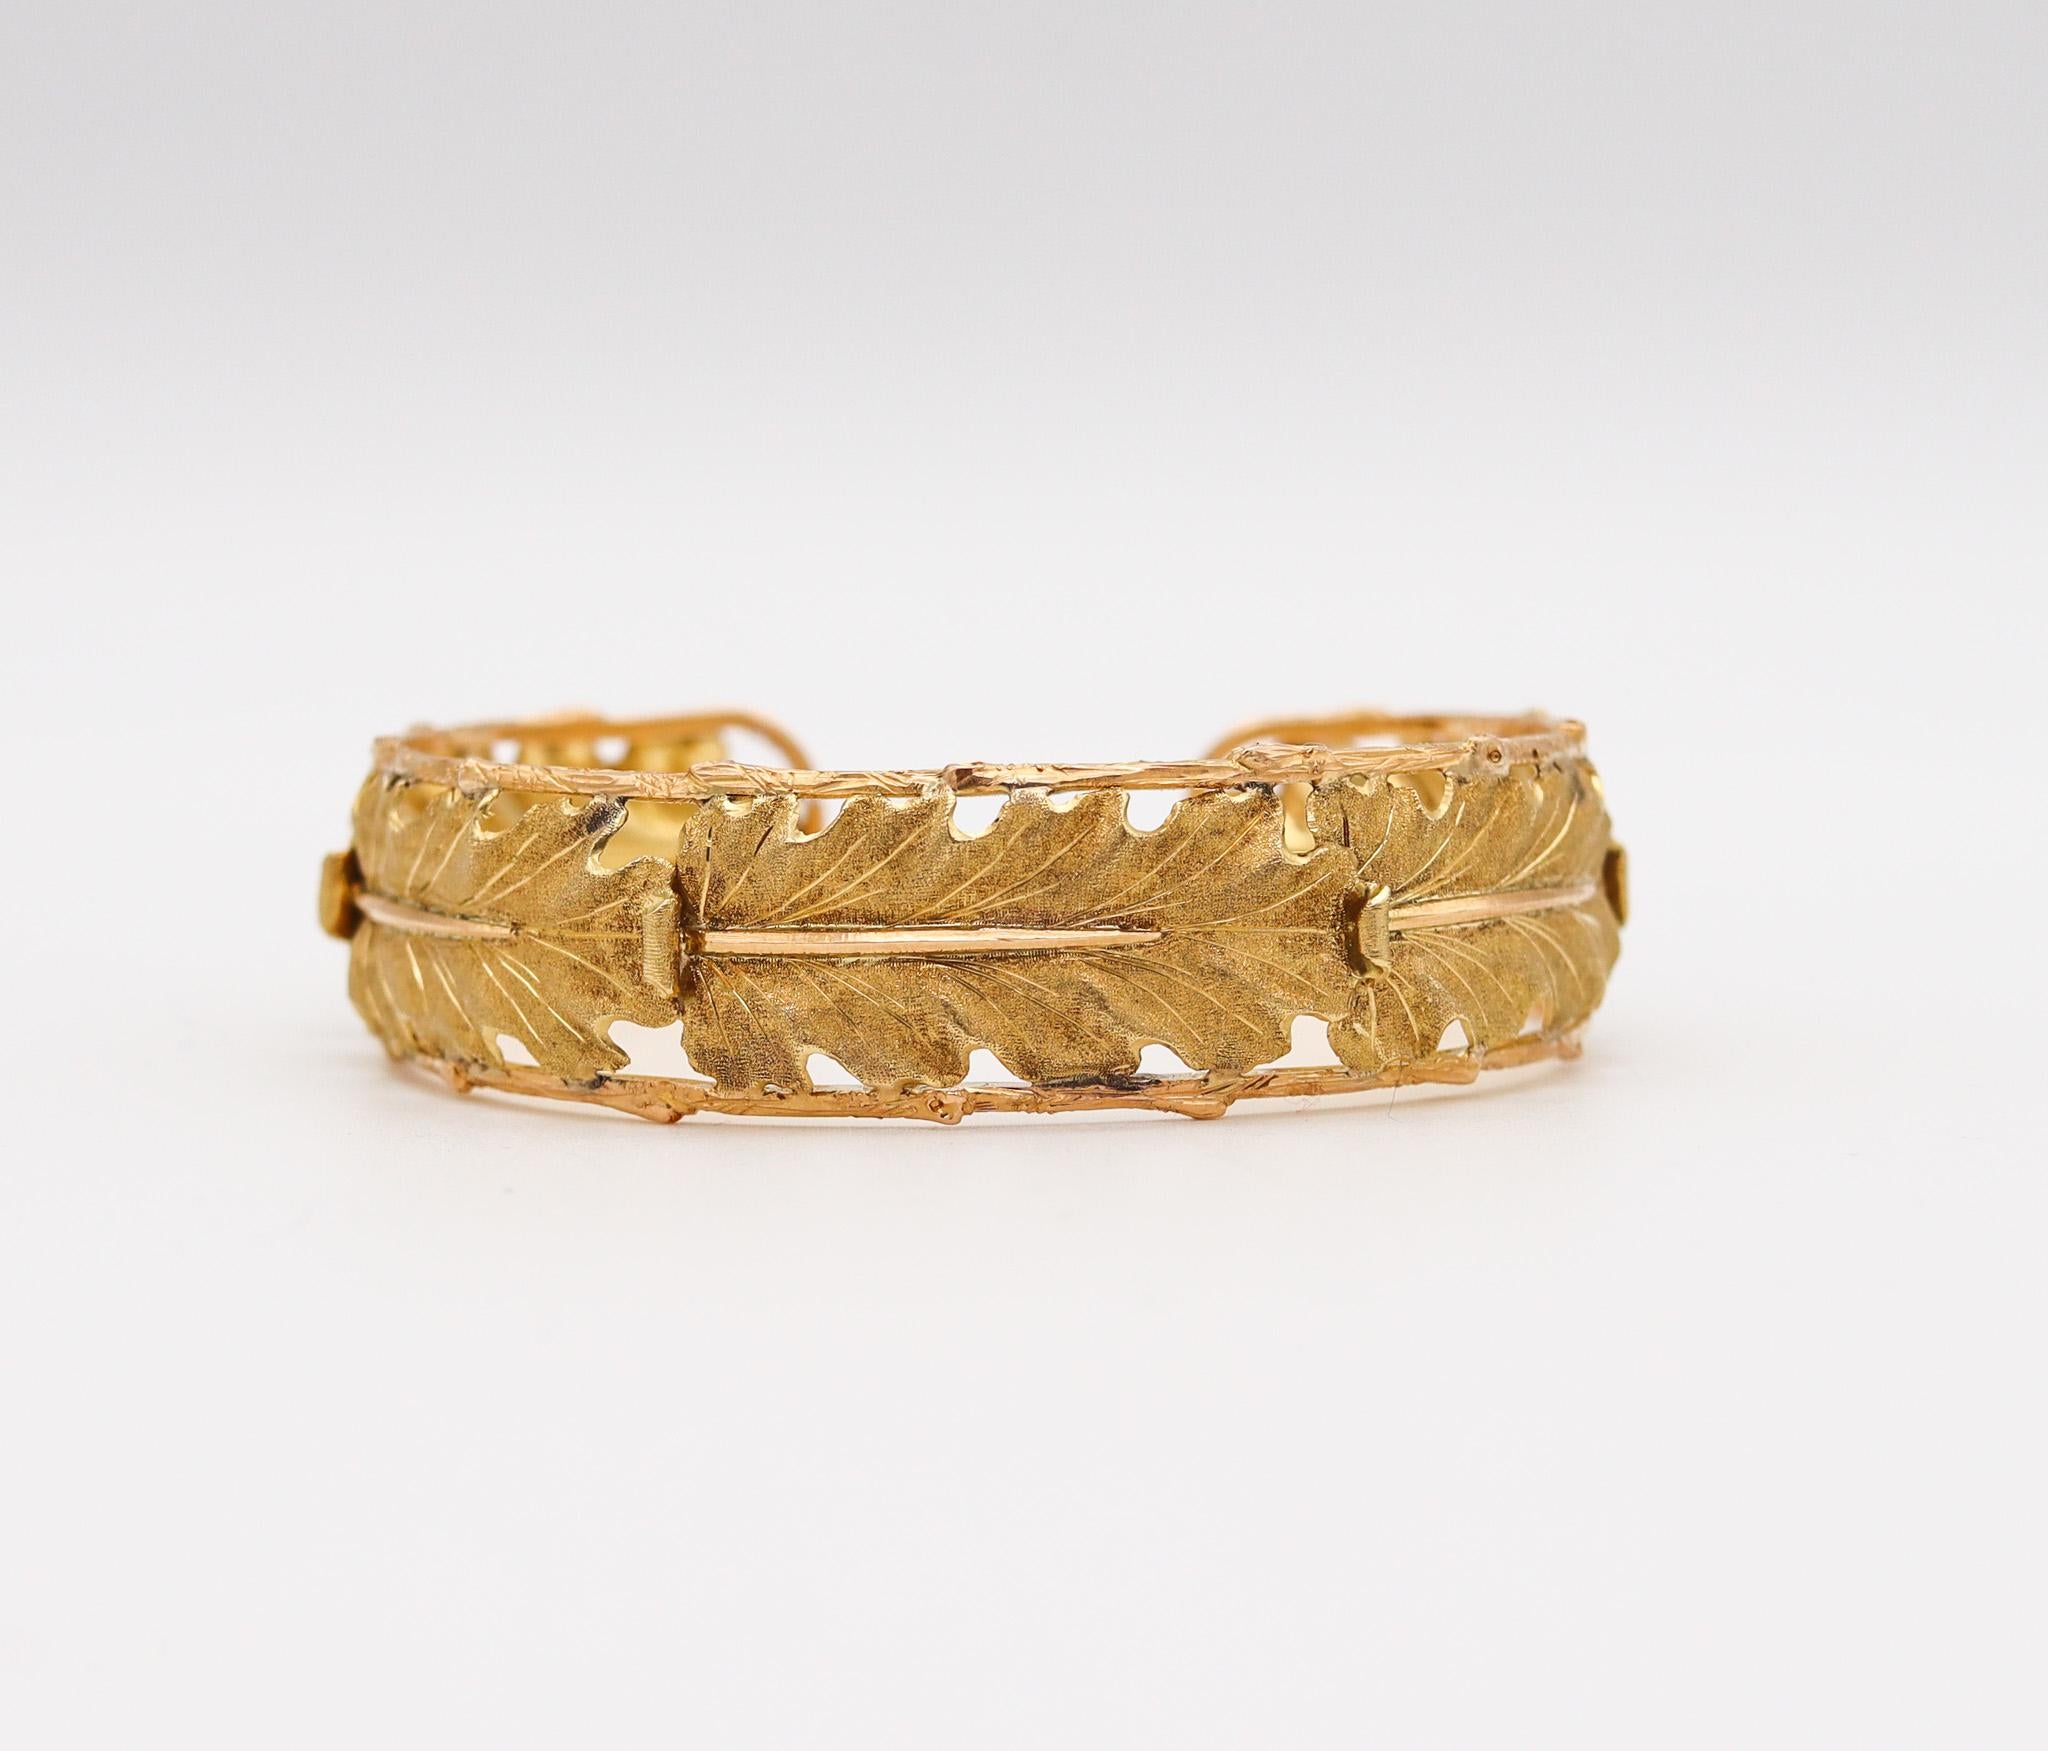 Cuff bracelet designed by Mario Buccellati.

Beautiful piece, created in Milano Italy by the house of Buccellati, back in the 1970. This cuff bracelet was carefully crafted by Mario Buccellati itself in solid yellow gold of 18 karats with chiseled